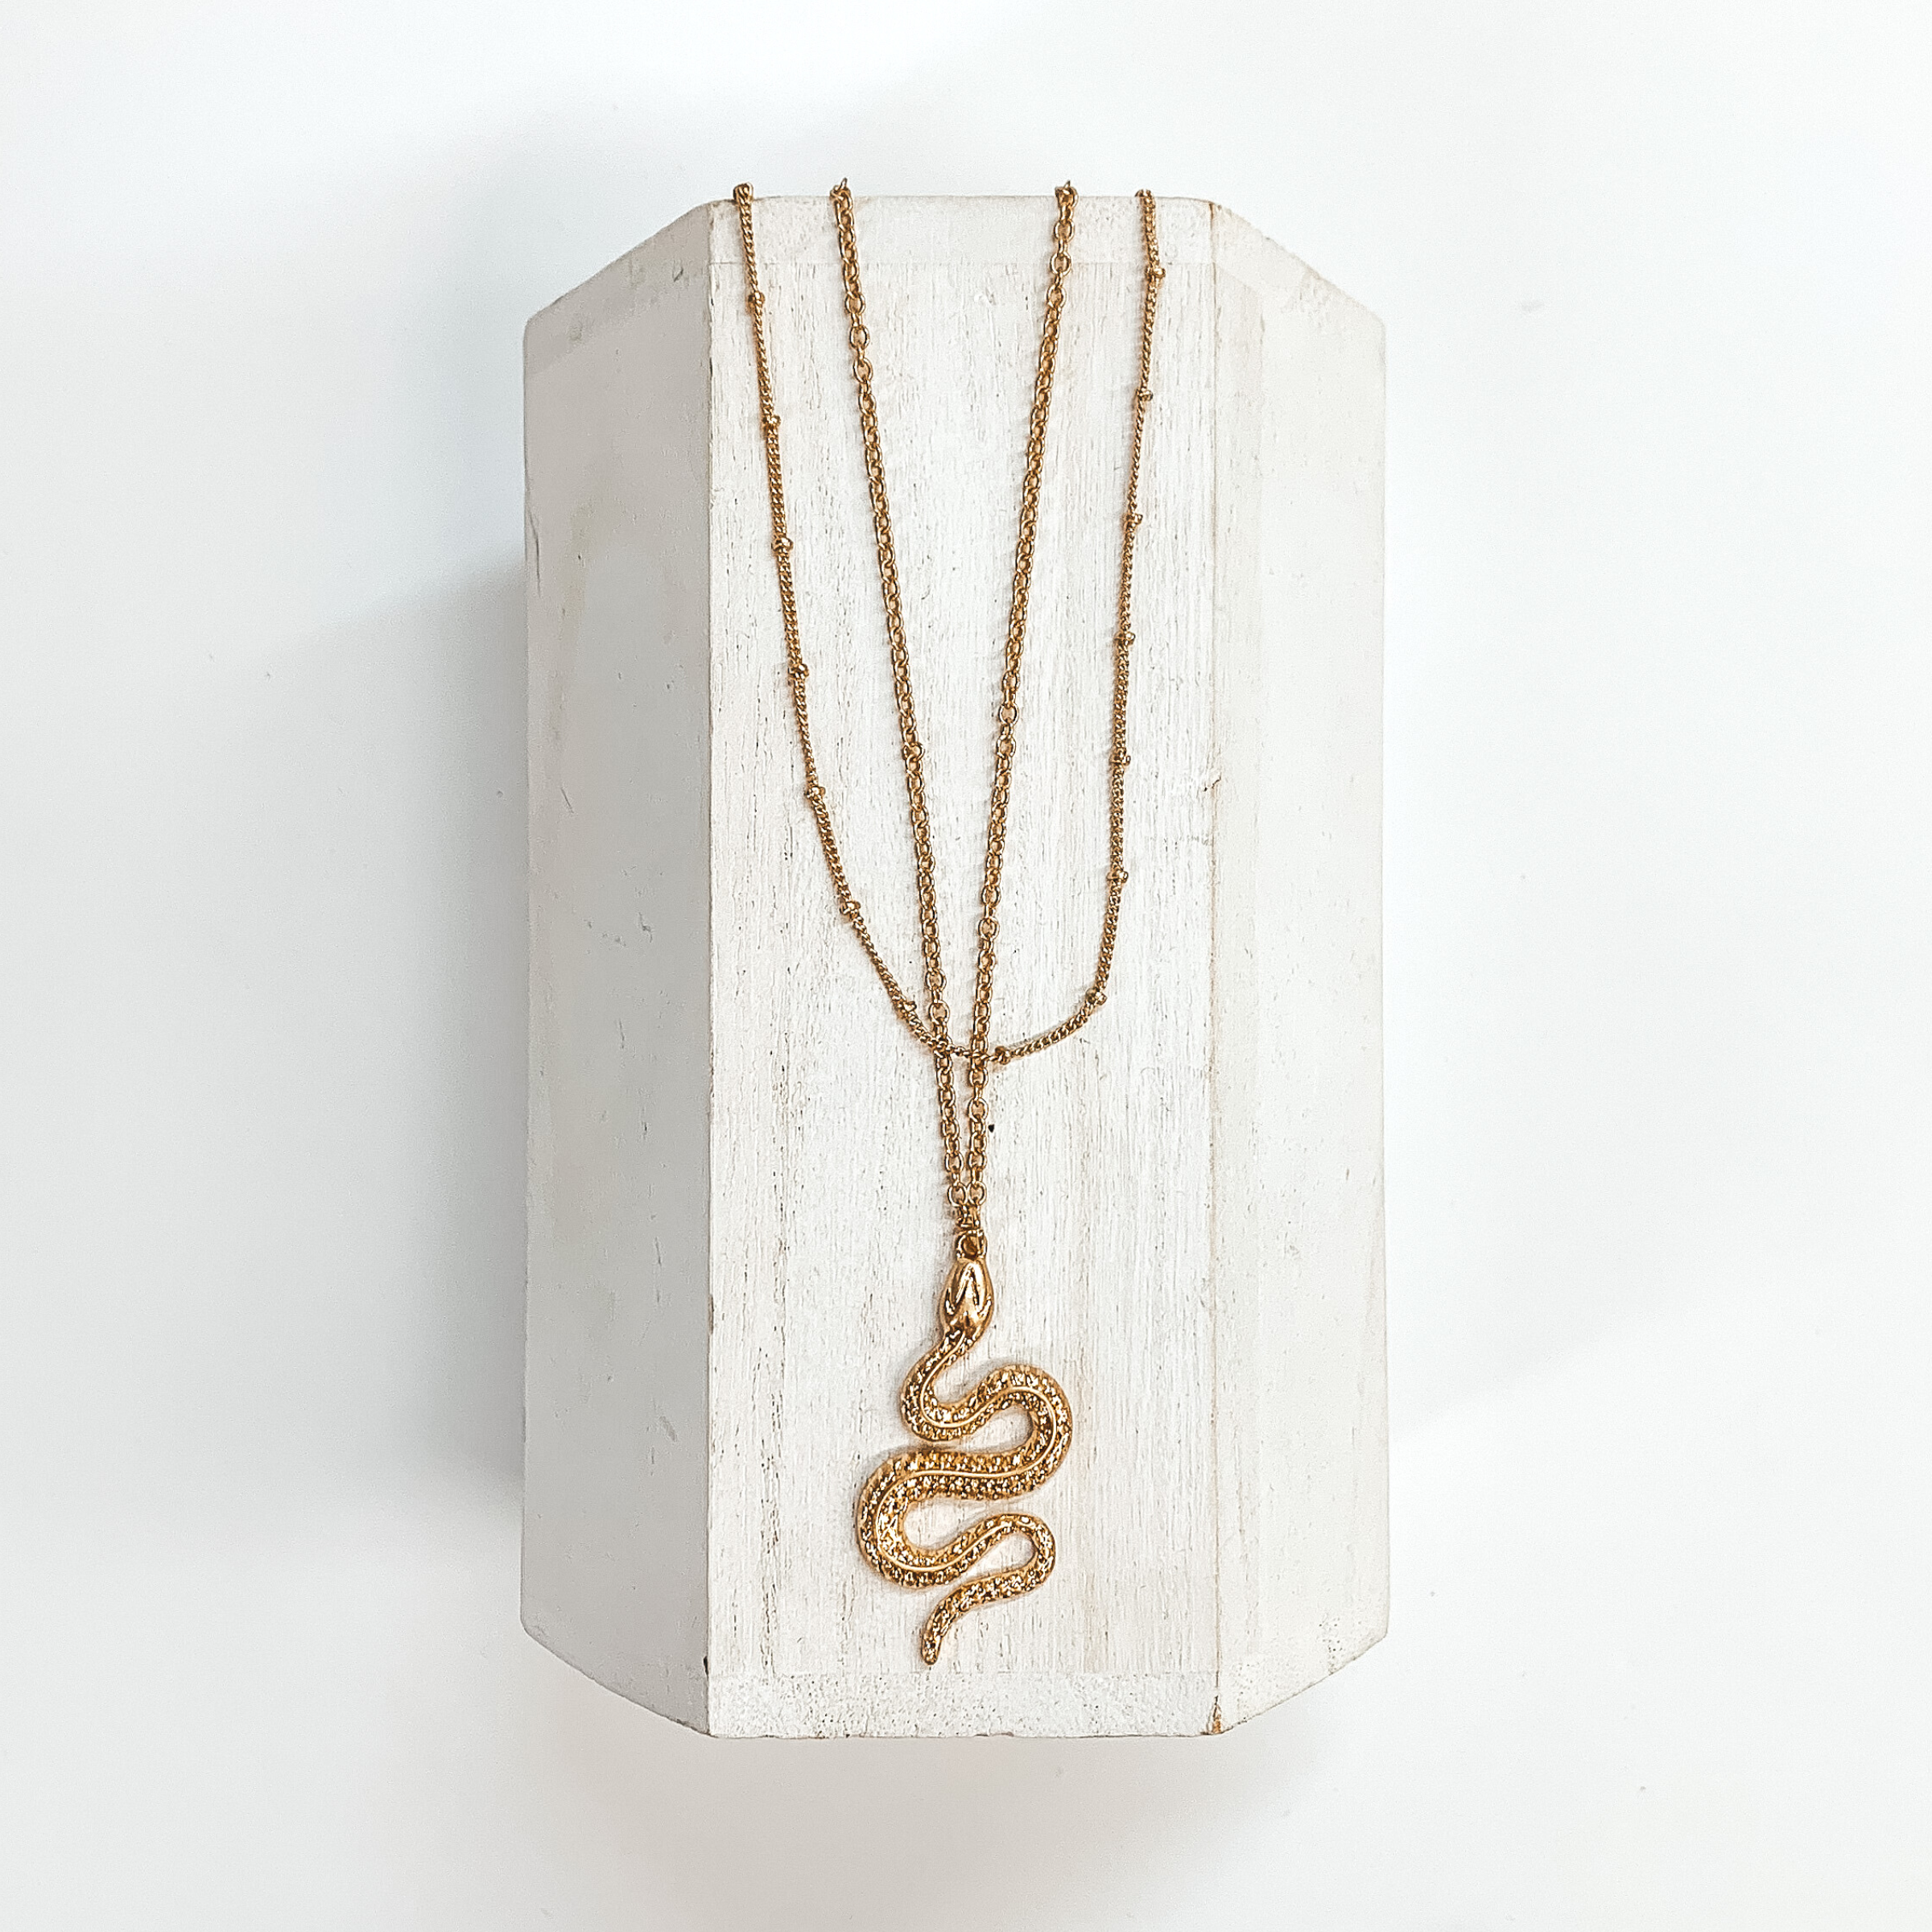 Double layered gold necklaces with a large snake pendant, the smallest  chain has spacers throughout. This necklace is taken on a white block  and a white background.